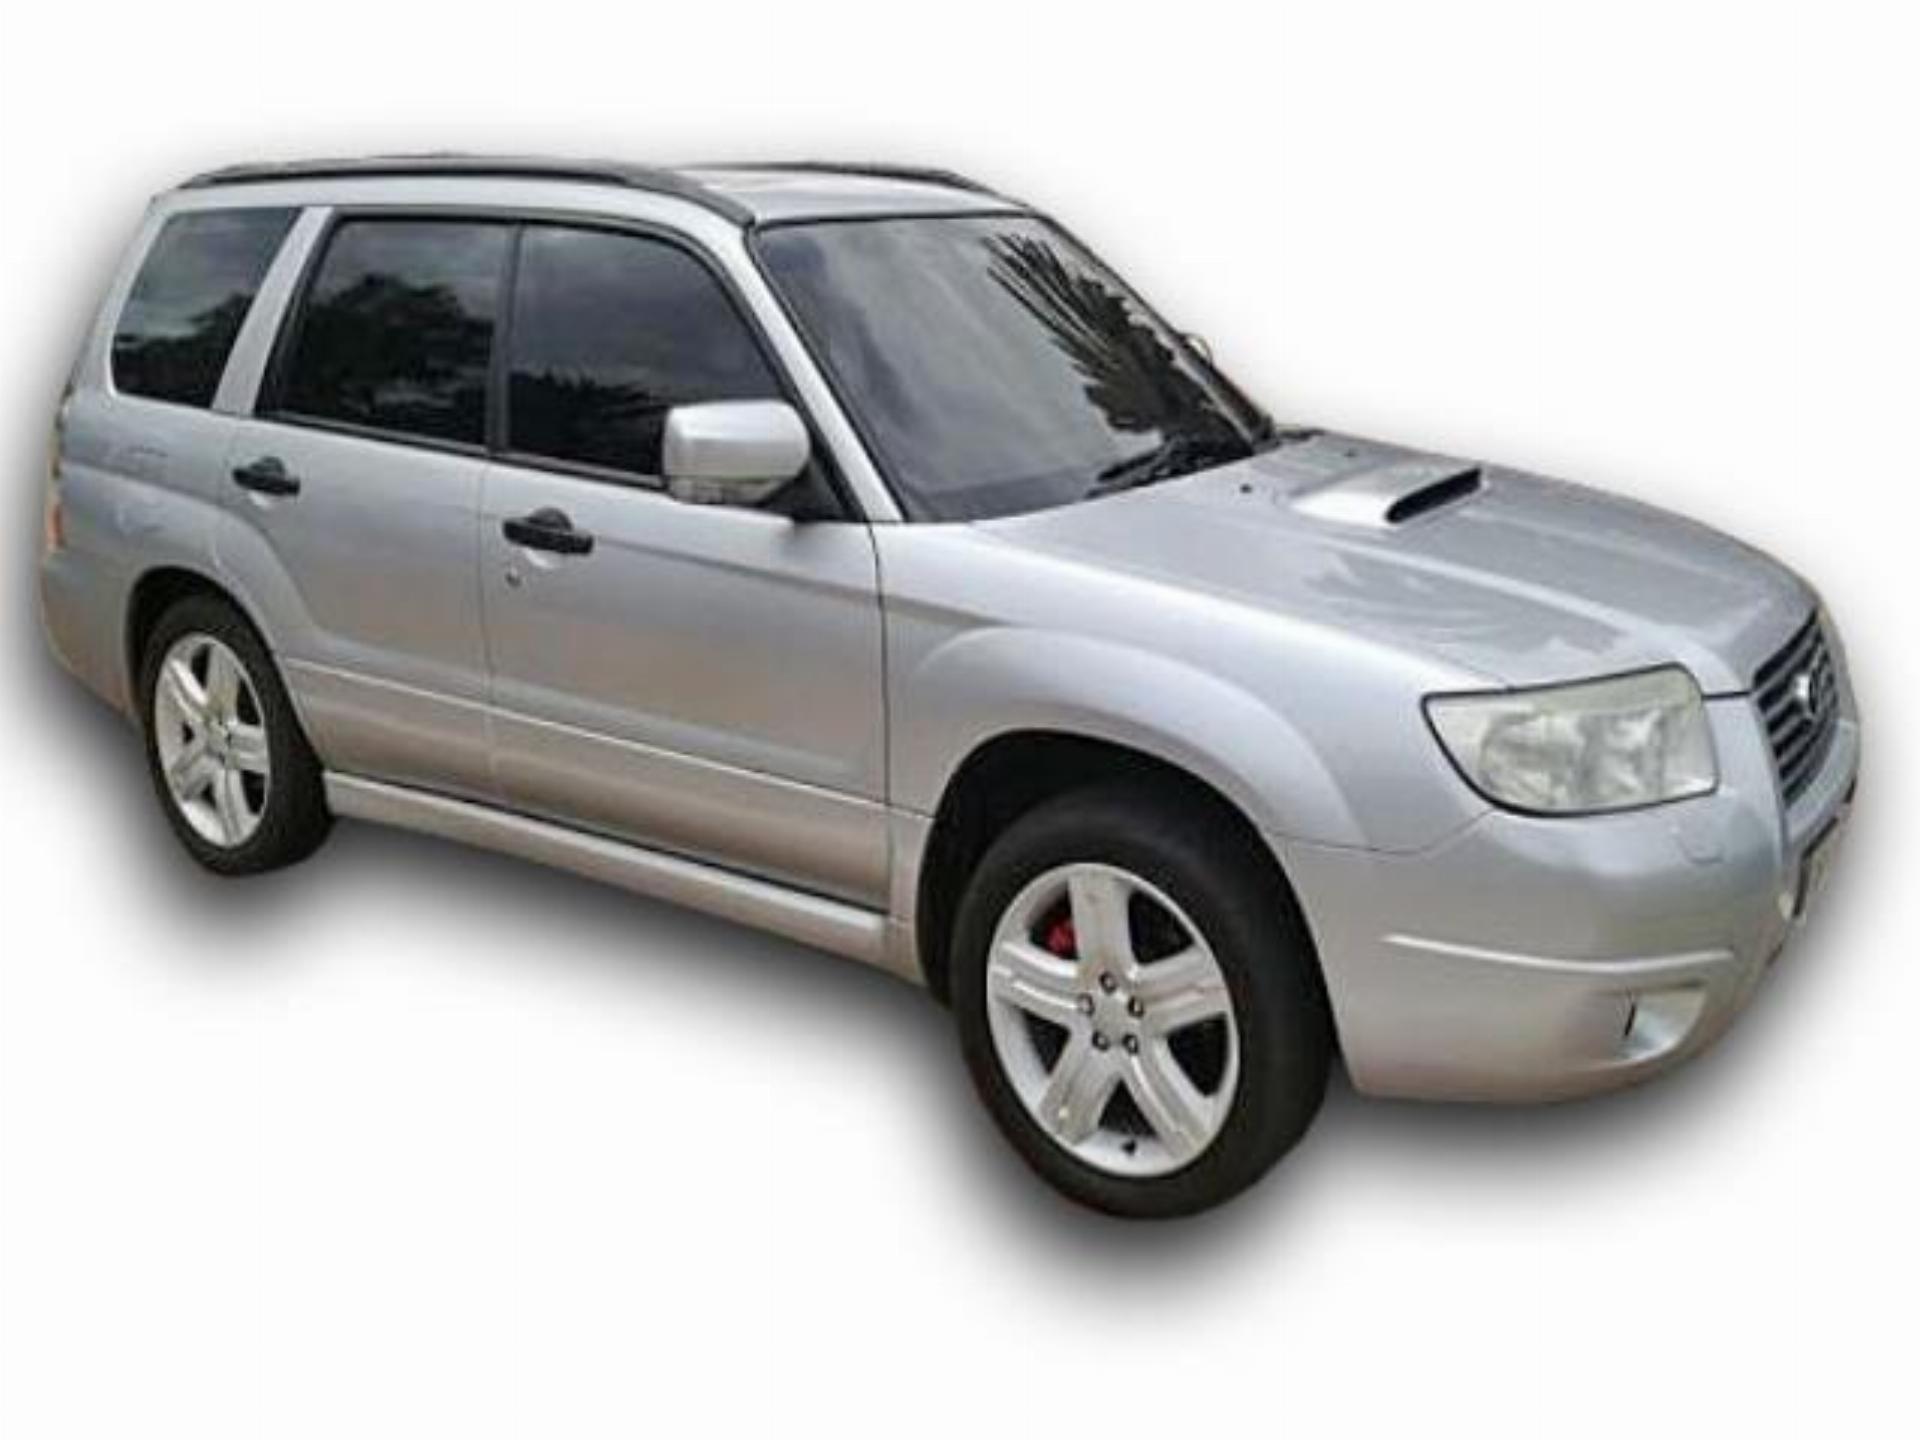 Used Subaru Forester 2.5 XT 2005 on auction PV1024464